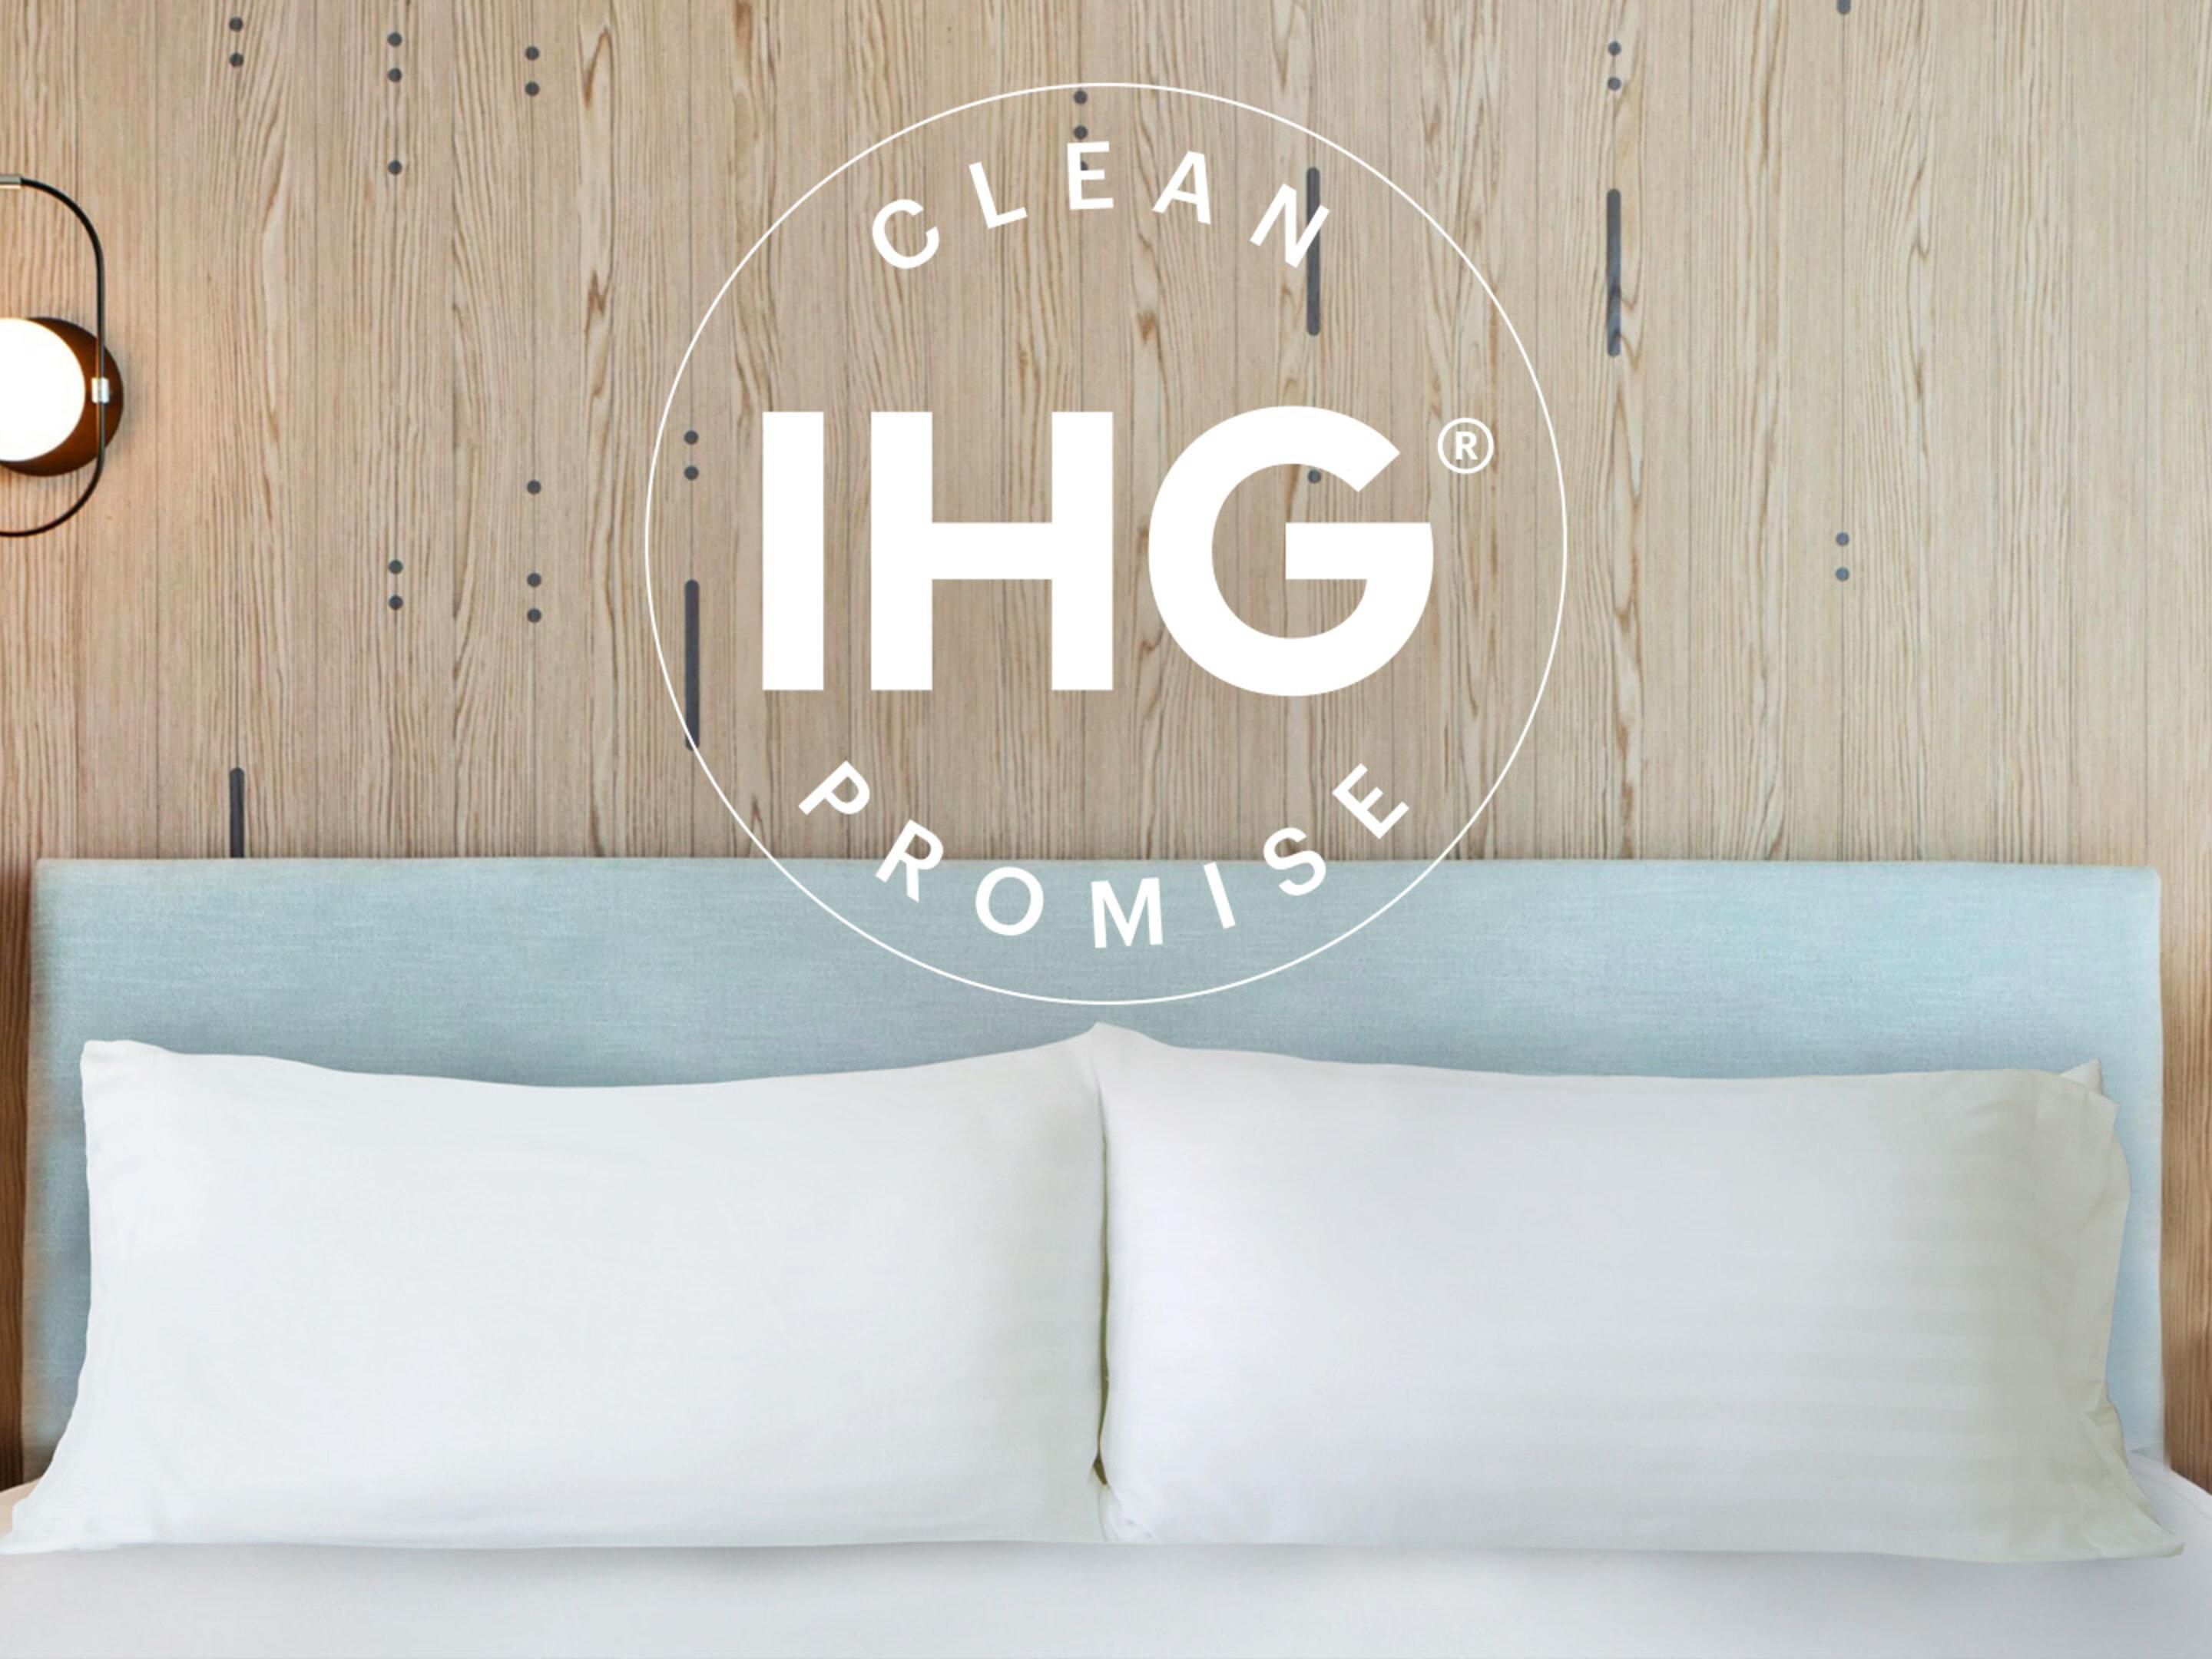 When you’re ready to travel again, we’ll be ready to welcome you. As the world adjusts to new travel norms and expectations, we’re enhancing the experience for you by using new science-led protocols and service measures, partnering with industry leading experts Cleveland Clinic, Ecolab and Diversey and launching a global IHG Clean Promise